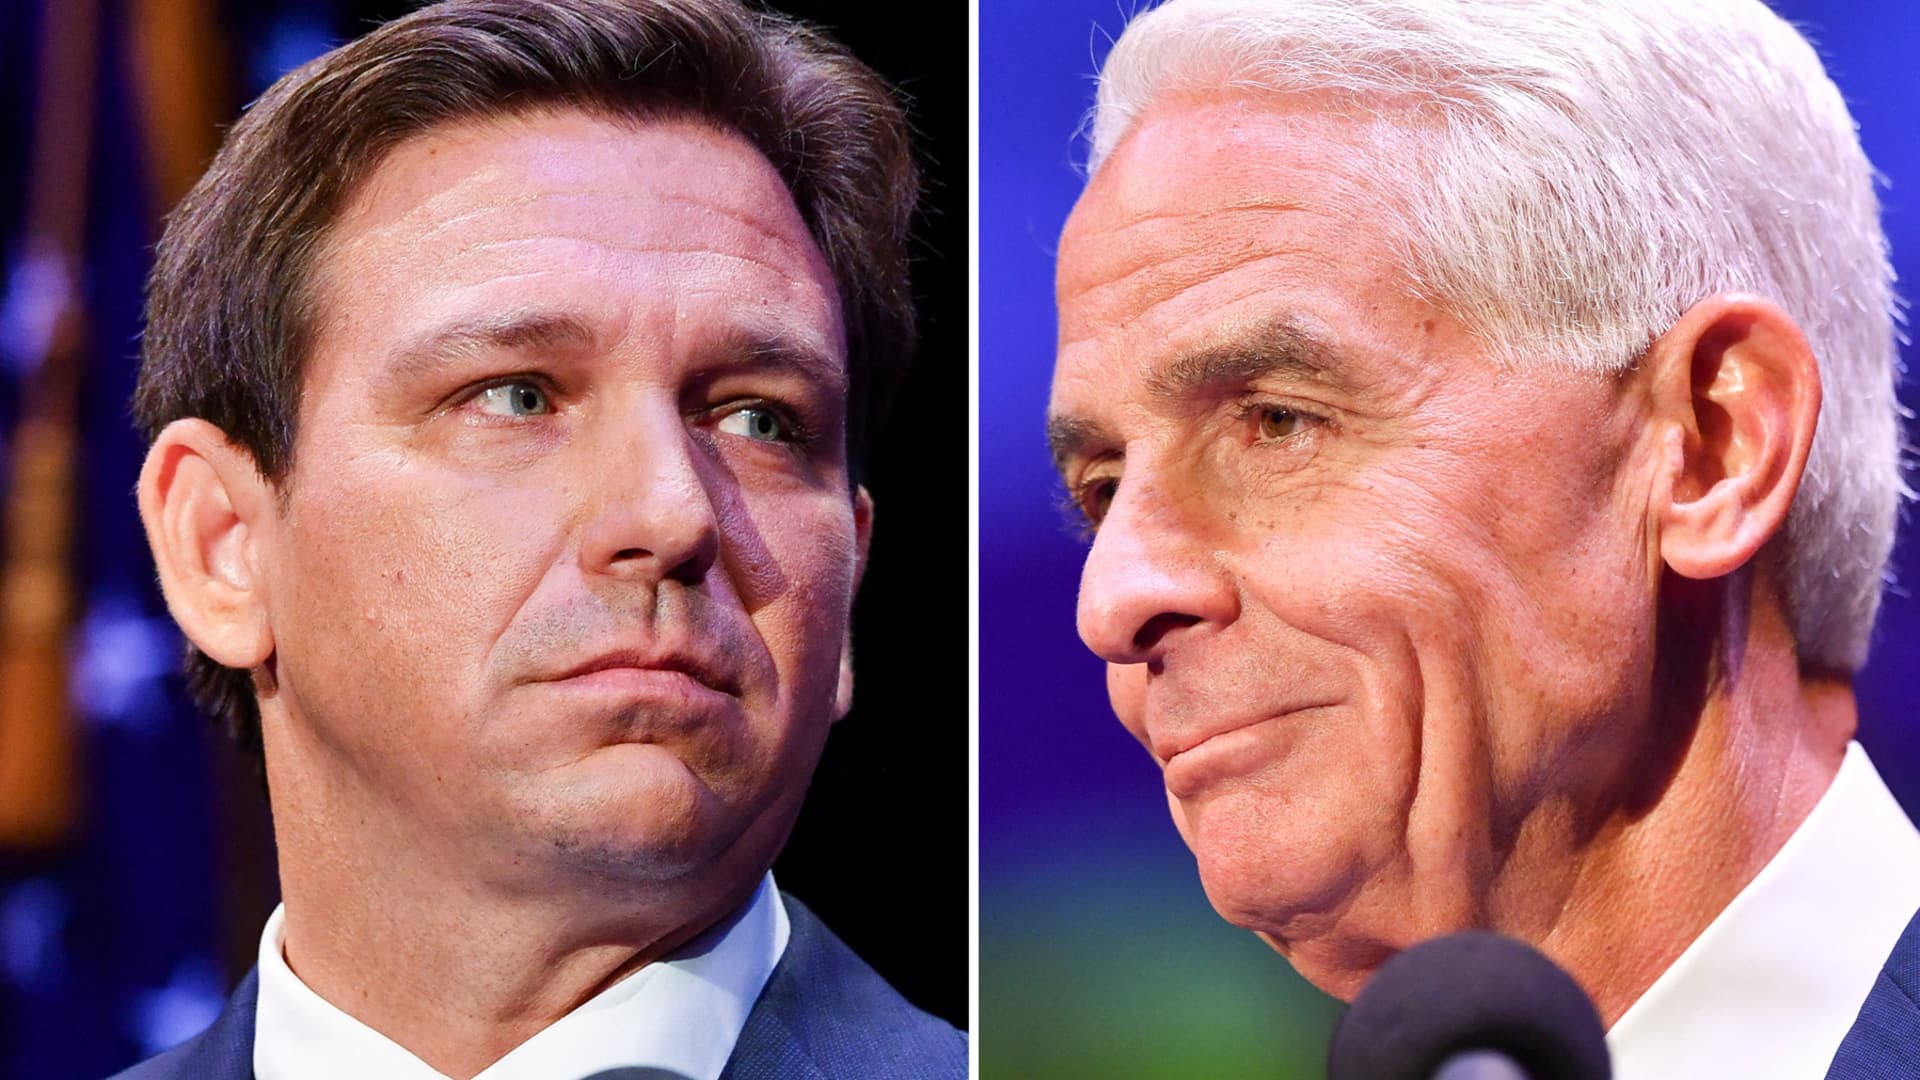 Florida's Republican incumbent Gov. Ron DeSantis takes to the stage opposite his Democratic Party challenger Charlie Crist, a former governor, at the Sunrise Theatre in Fort Pierce, Florida, U.S. October 24, 2022.